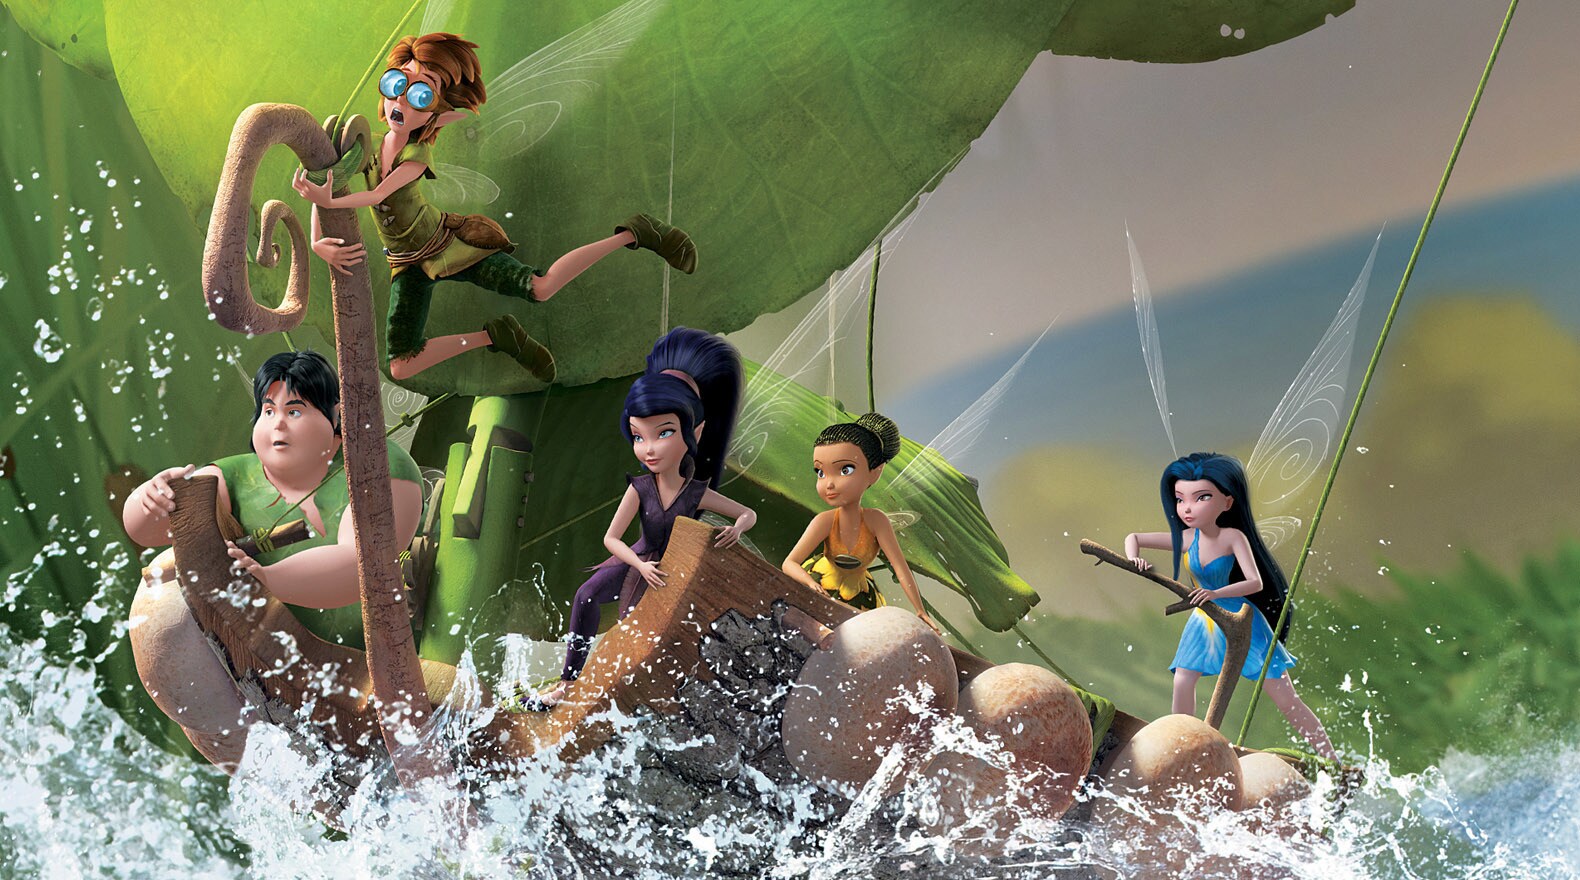 No matter the weather, Tink’s friends are determined to find her.